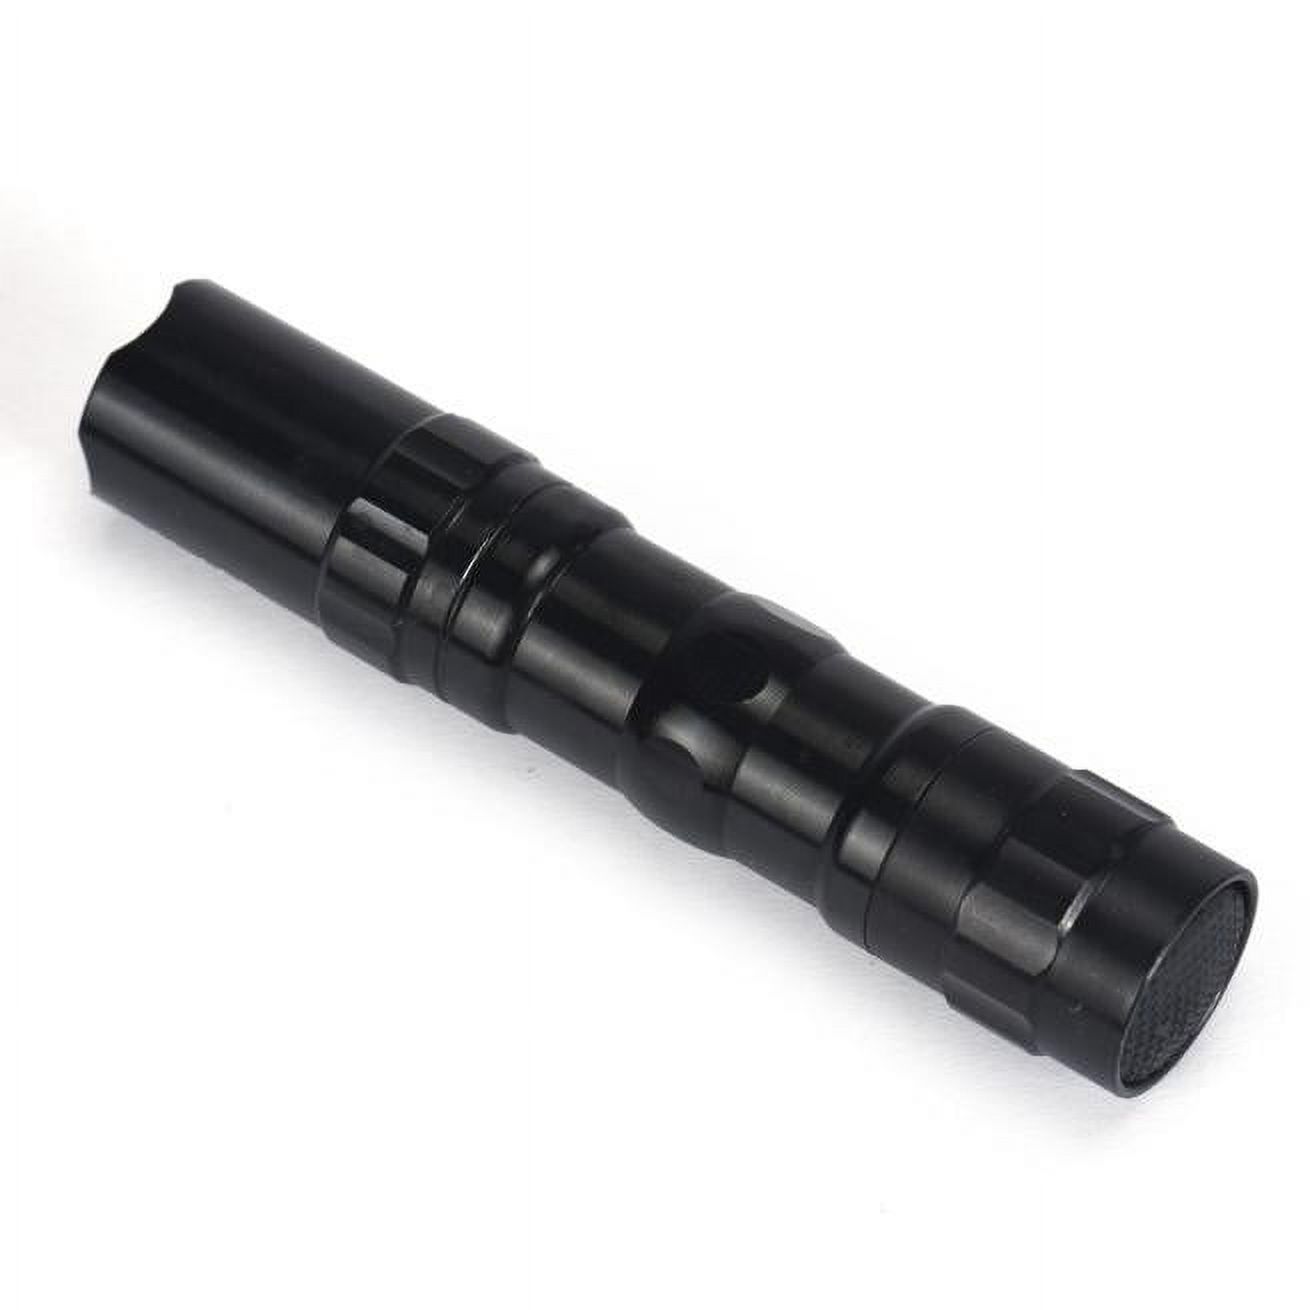 3W Super Bright LED  Clamp AA Flashlight Focus Torch Light - image 4 of 5